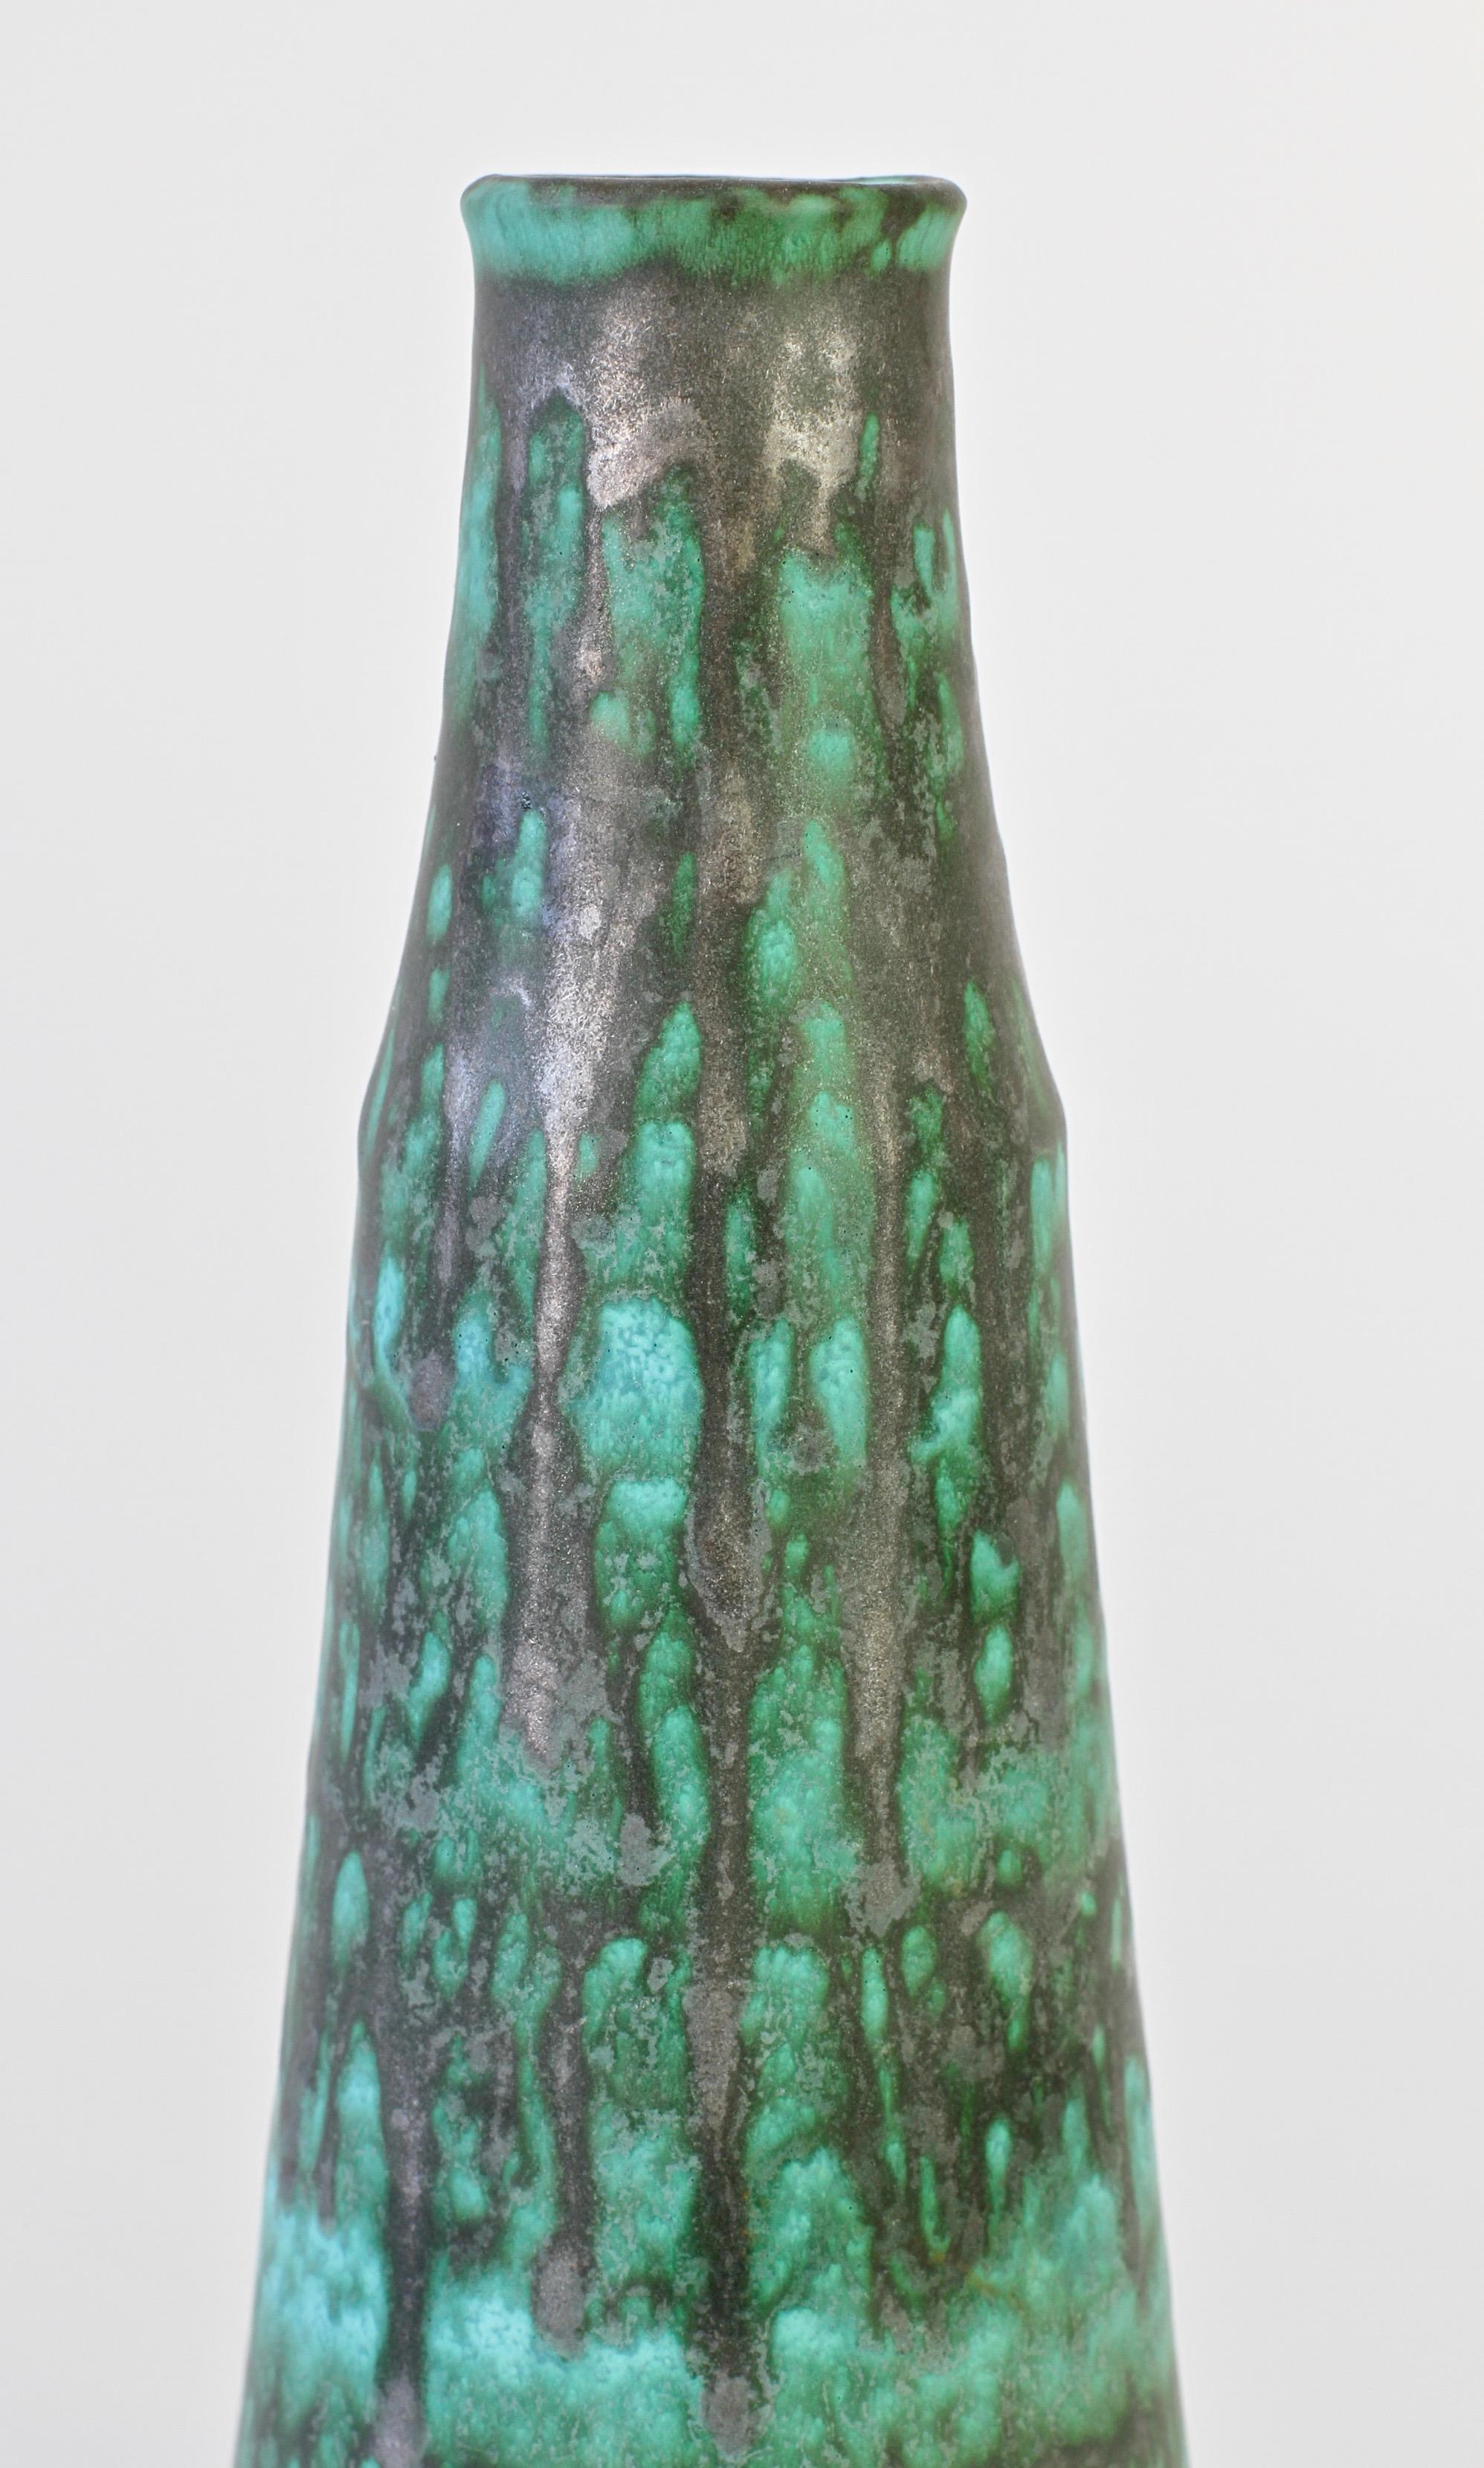 20th Century Vintage Midcentury Green and Graphite Glazed Vase by Waechtersbach, 1950s For Sale